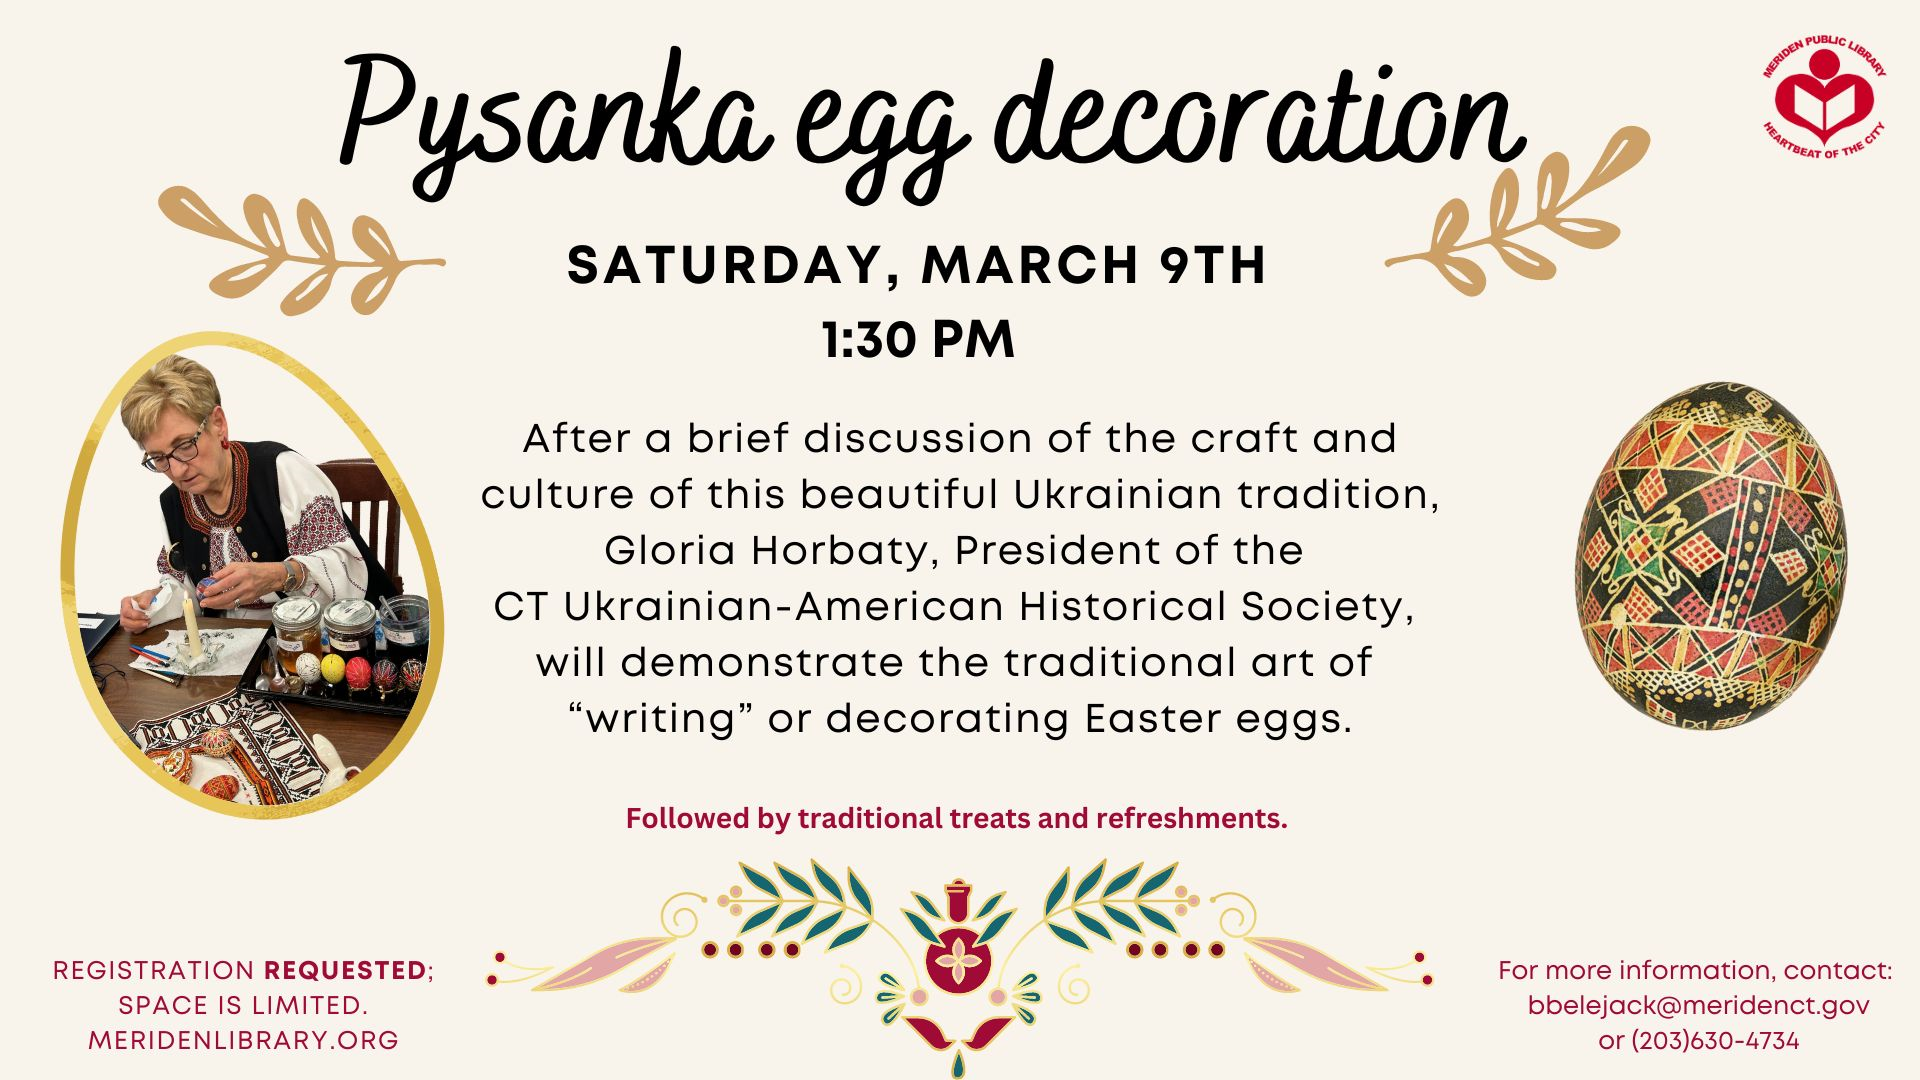 Picture of woman decorating Ukrainian eggs and a picture of a decorated Ukrainian egg between text